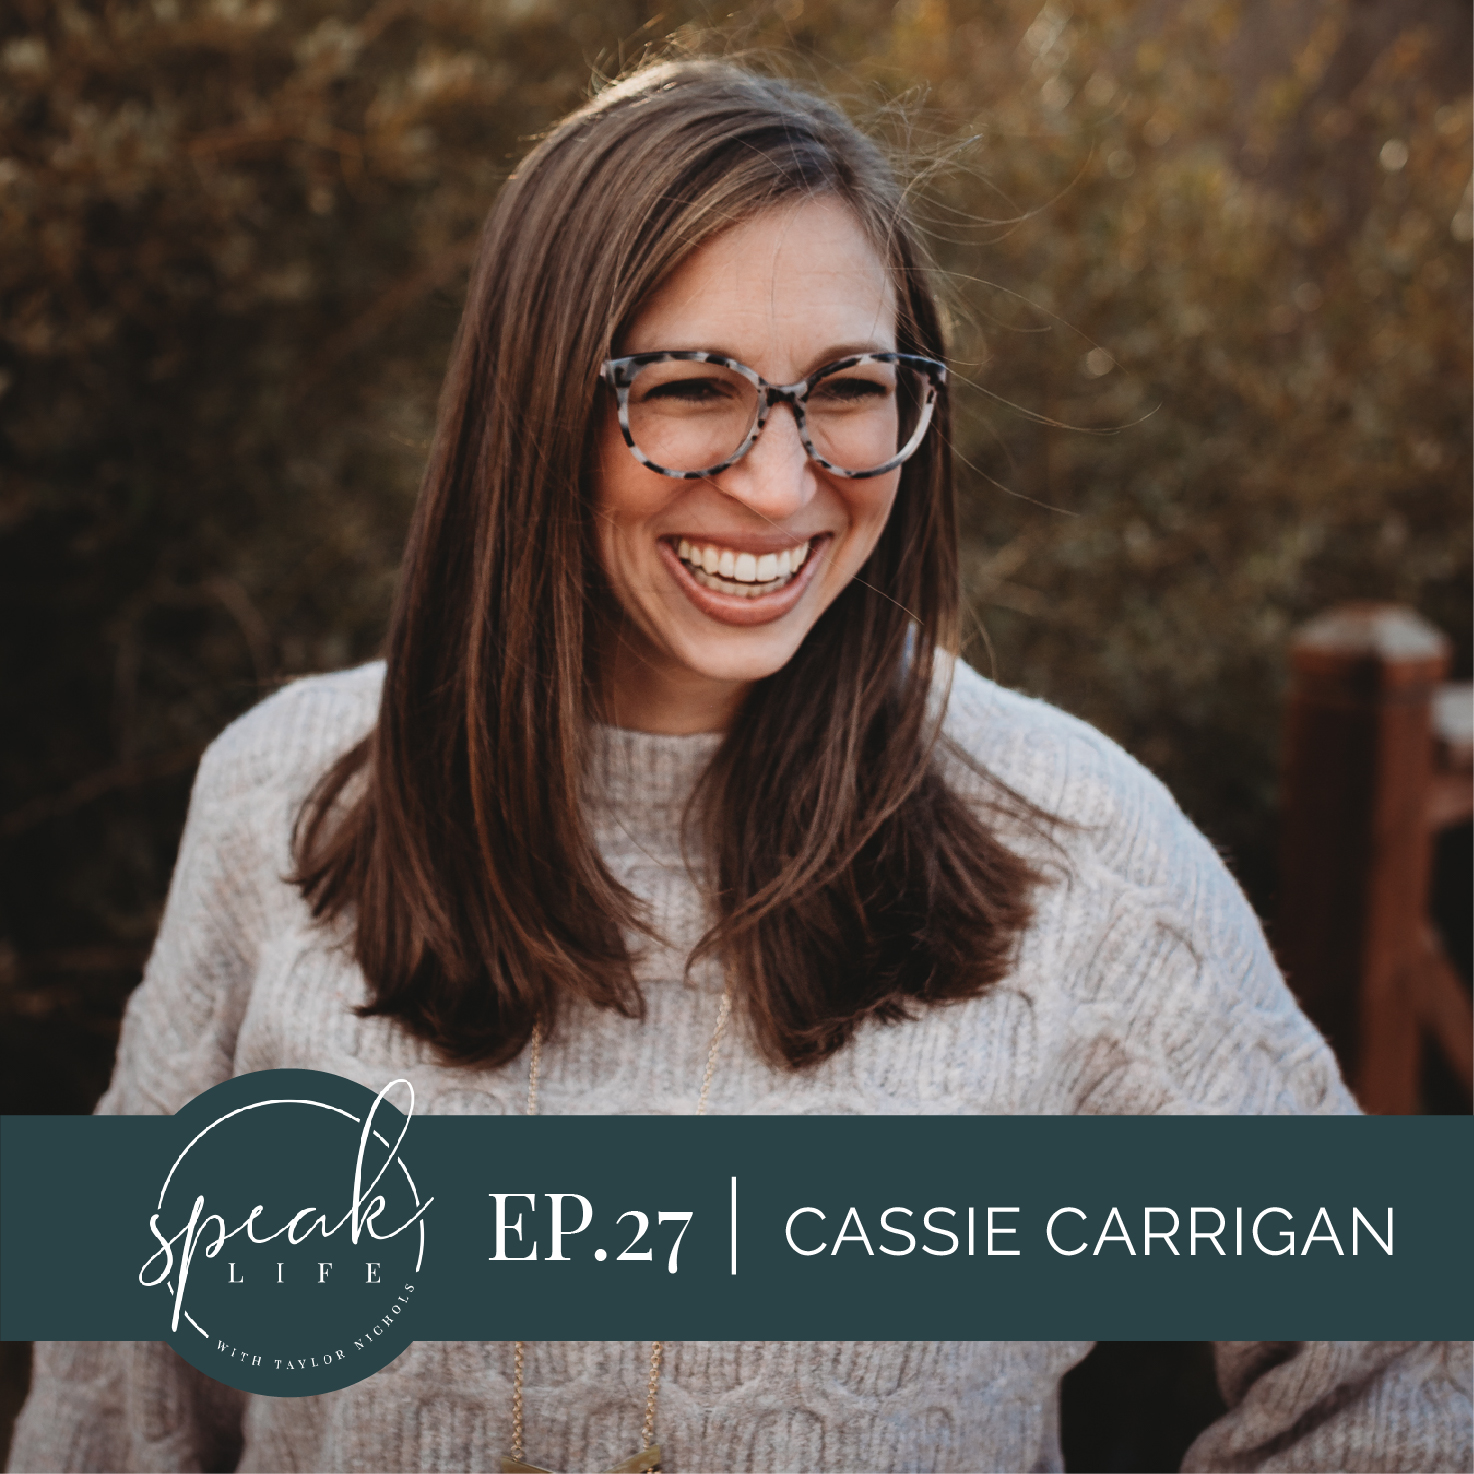 Episode 27. Cassie Carrigan – From ‘unimaginable sorrow’ to ‘undeniable truth’